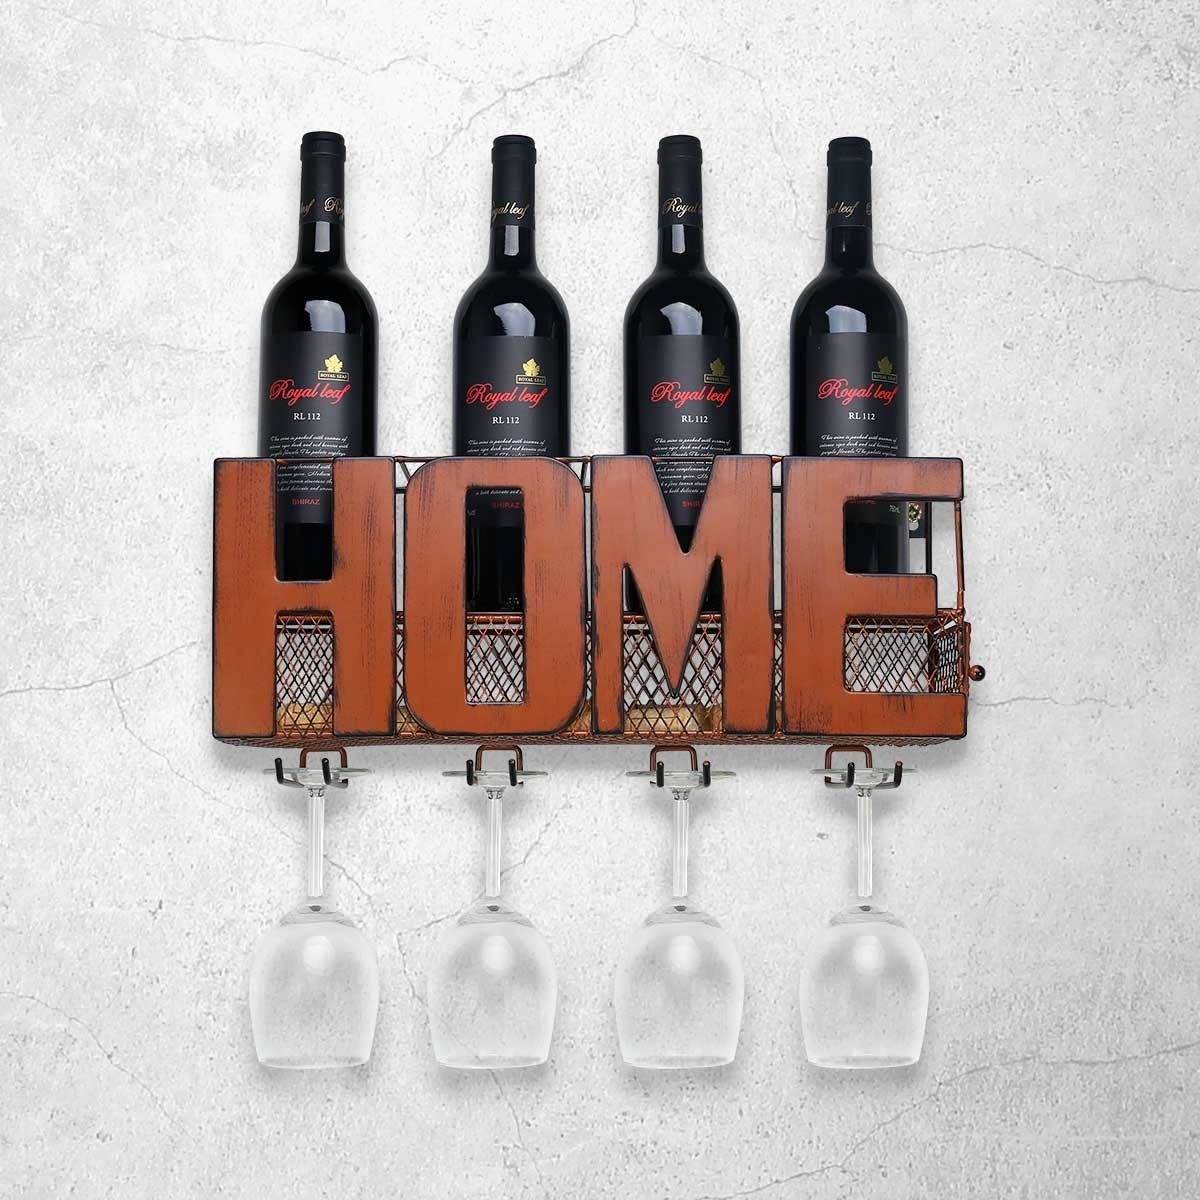 Wall Mounted Wine and Glass Rack with HOME Sign Metal Wall Art 4 Bottle Holder